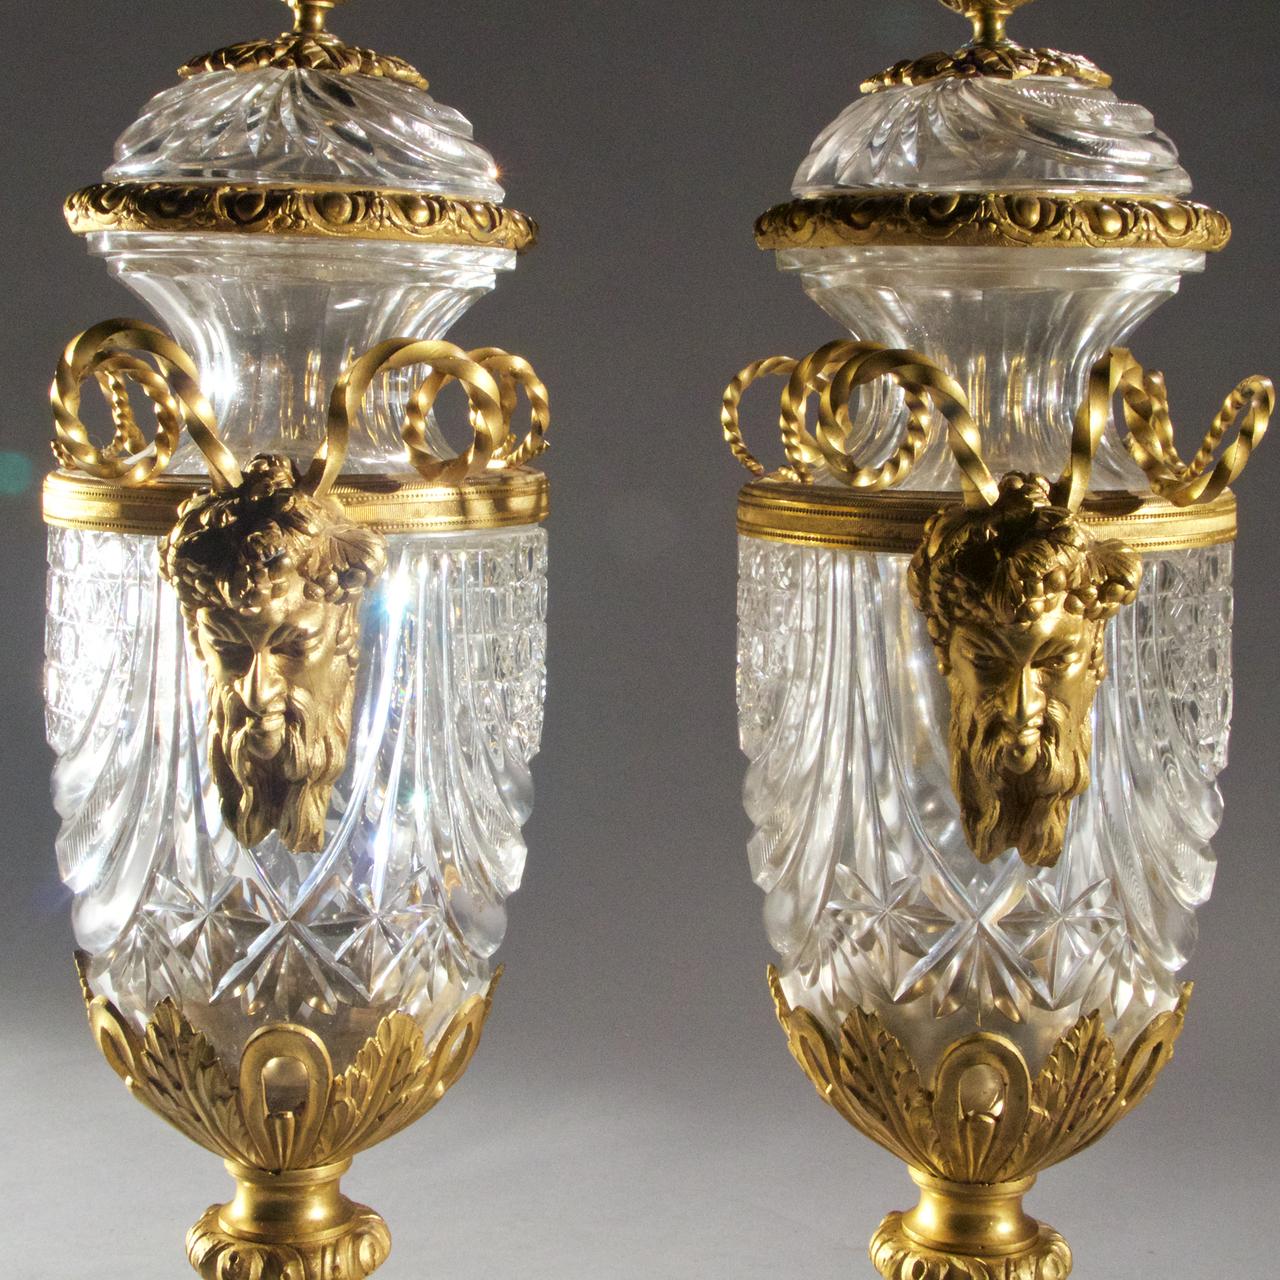 Fine pair of gilt bronze-mounted crystal vases with covers, attributed to Baccarat.